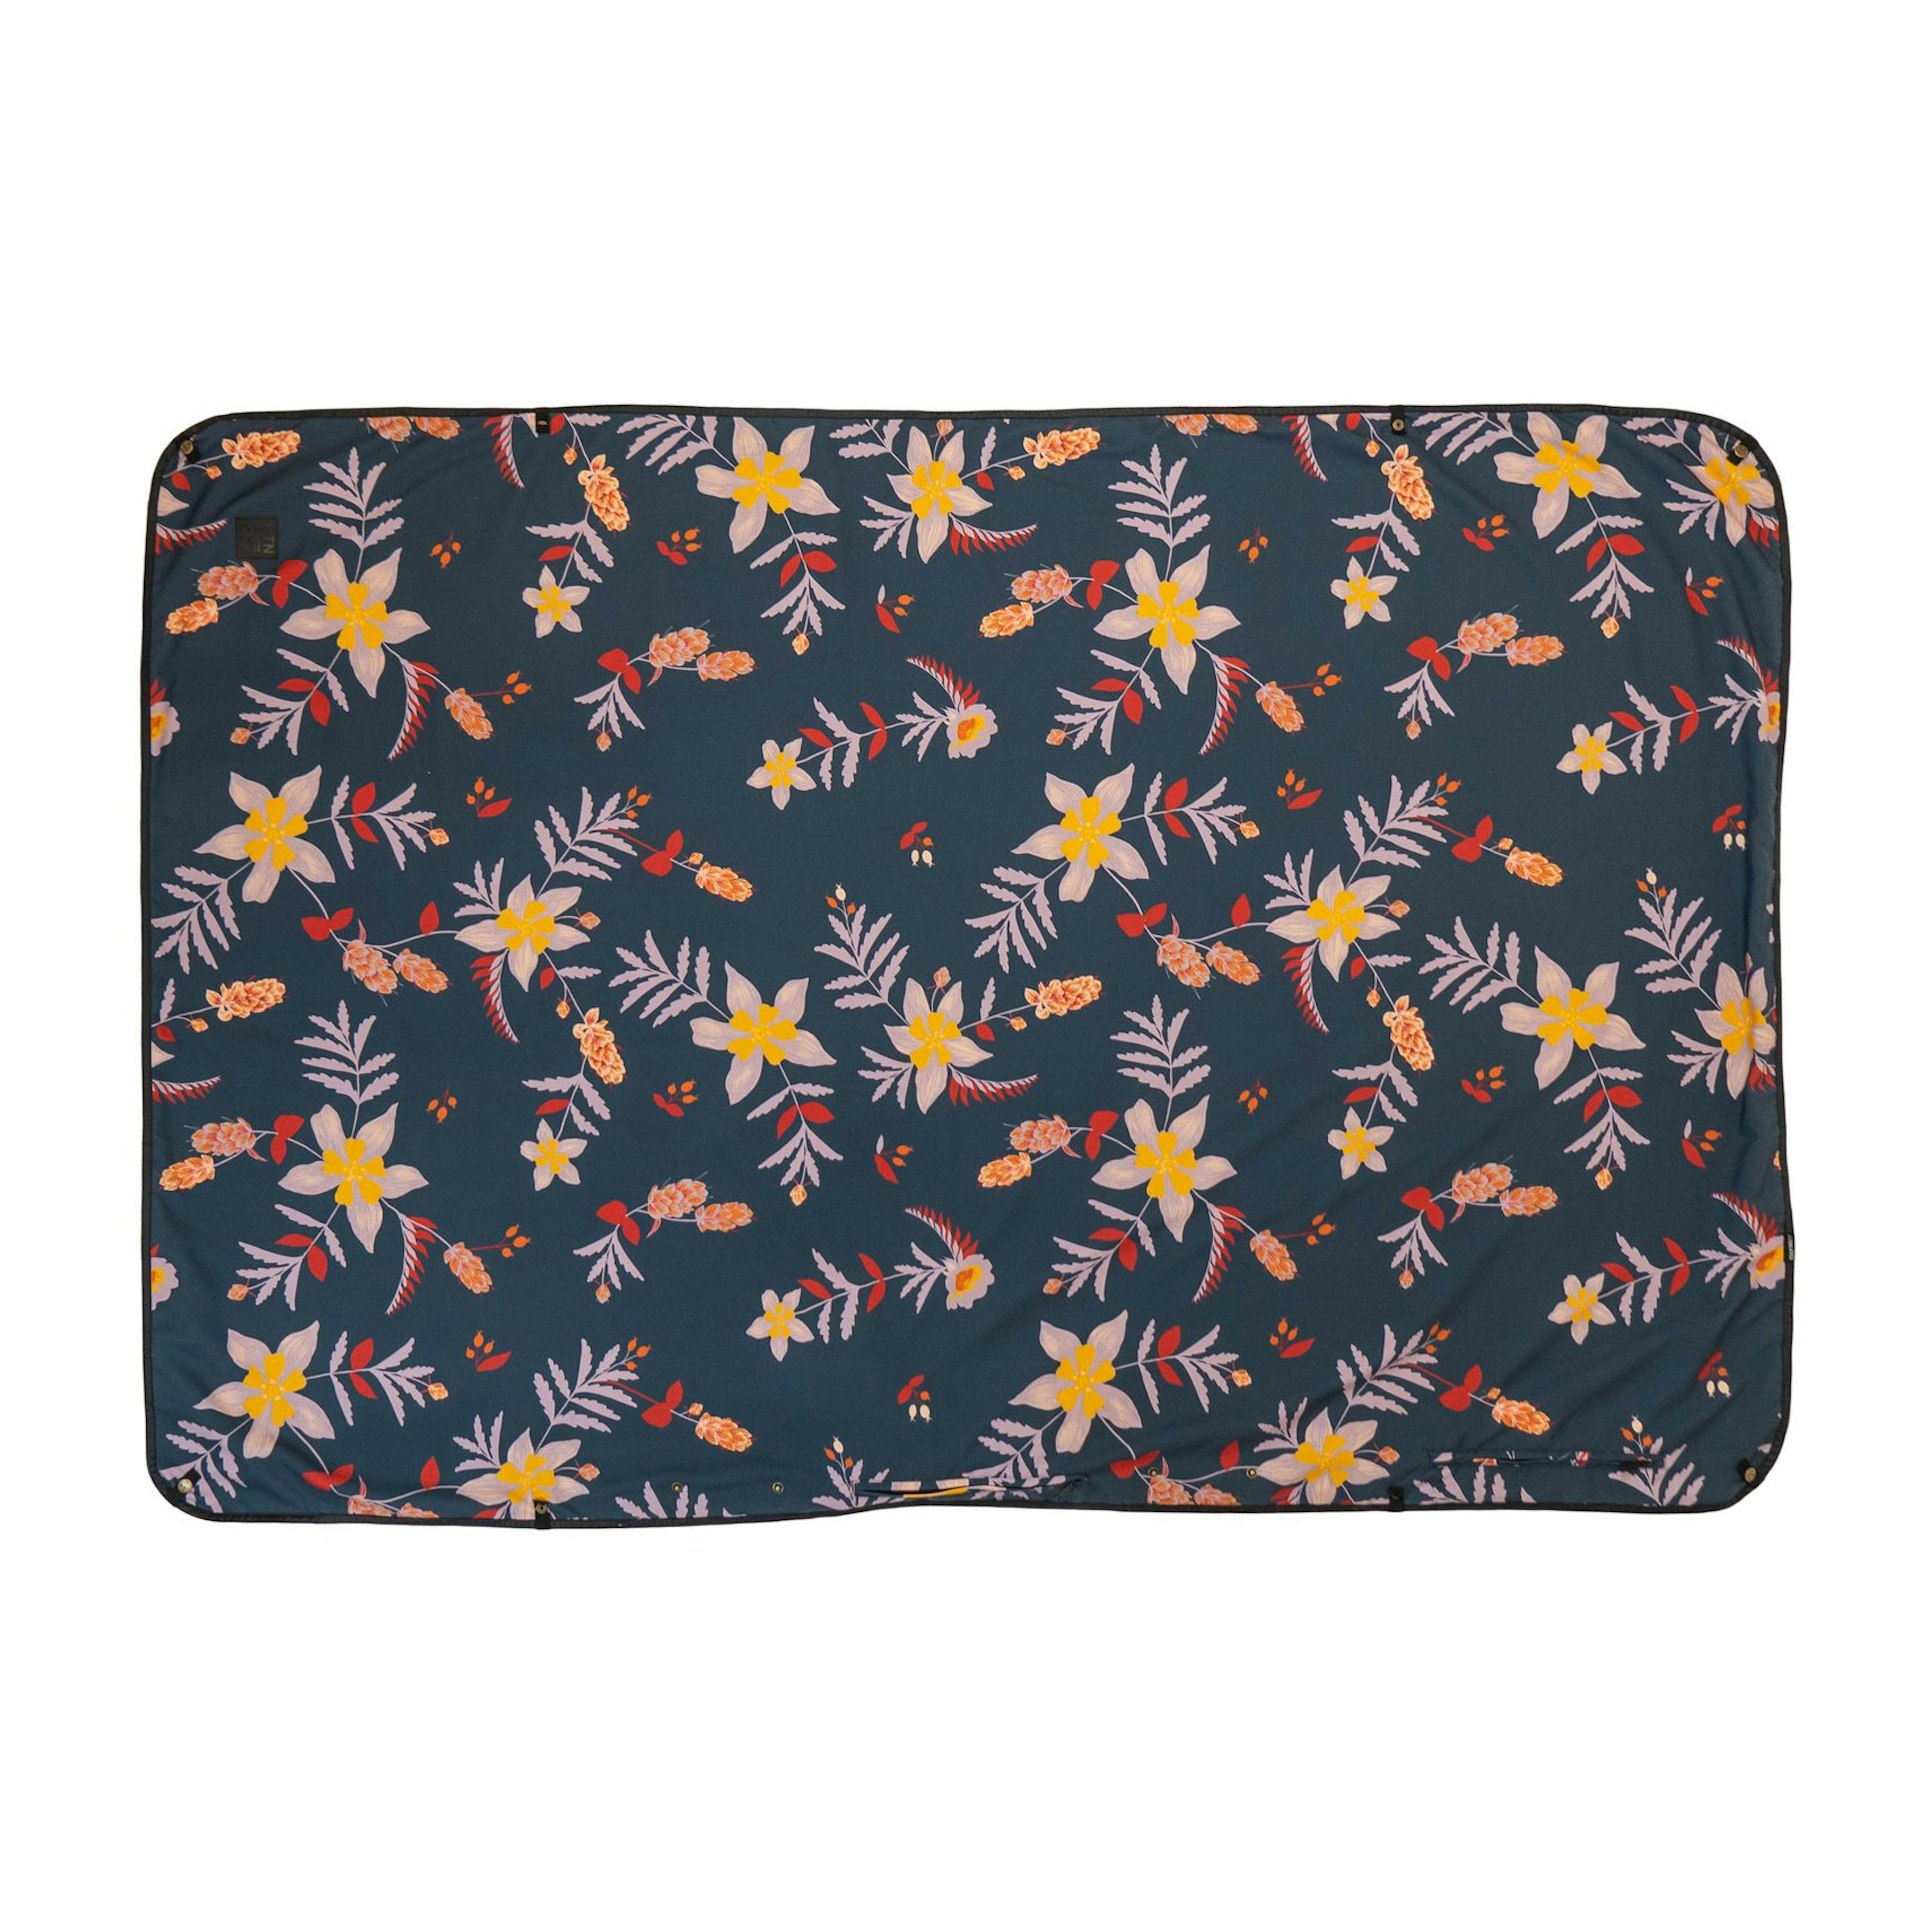 Coalatree's Kachula adventure blanket with a floral print on navy background